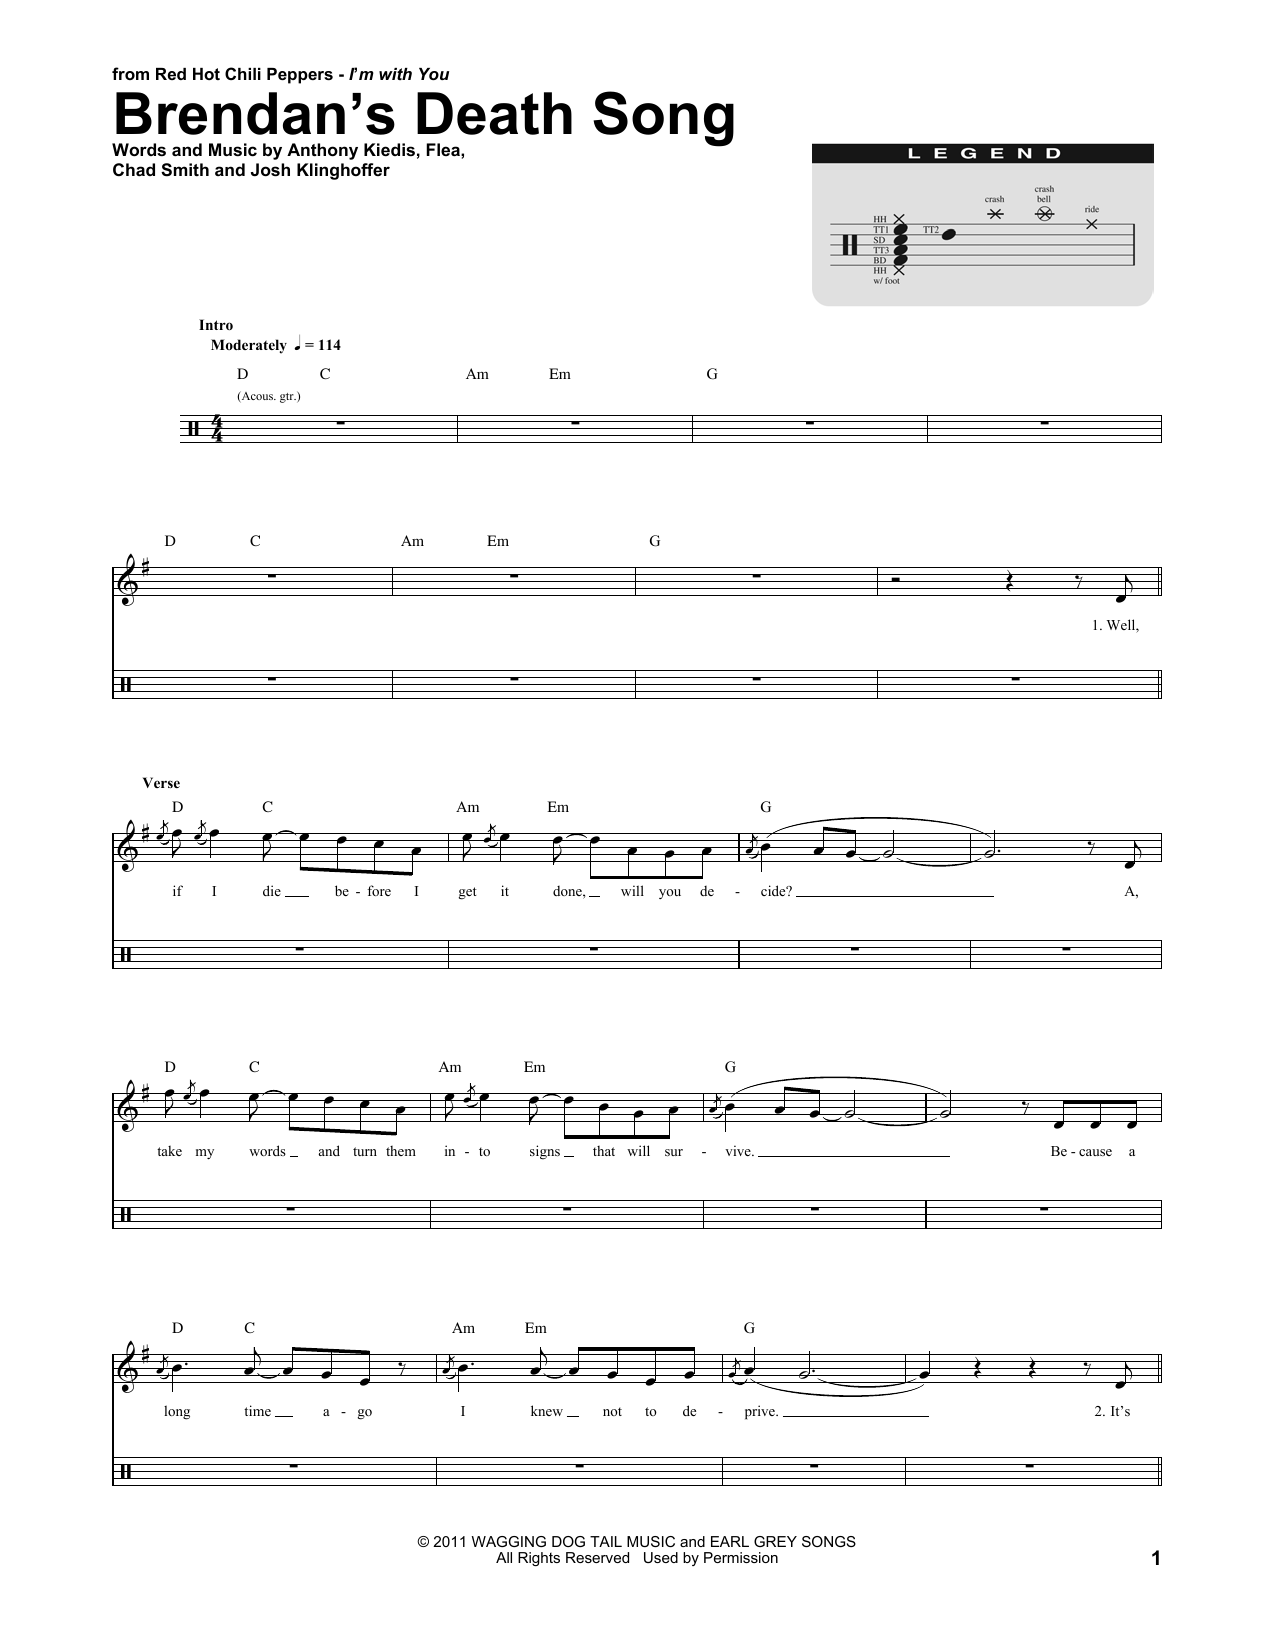 Download Red Hot Chili Peppers Brendan's Death Song Sheet Music